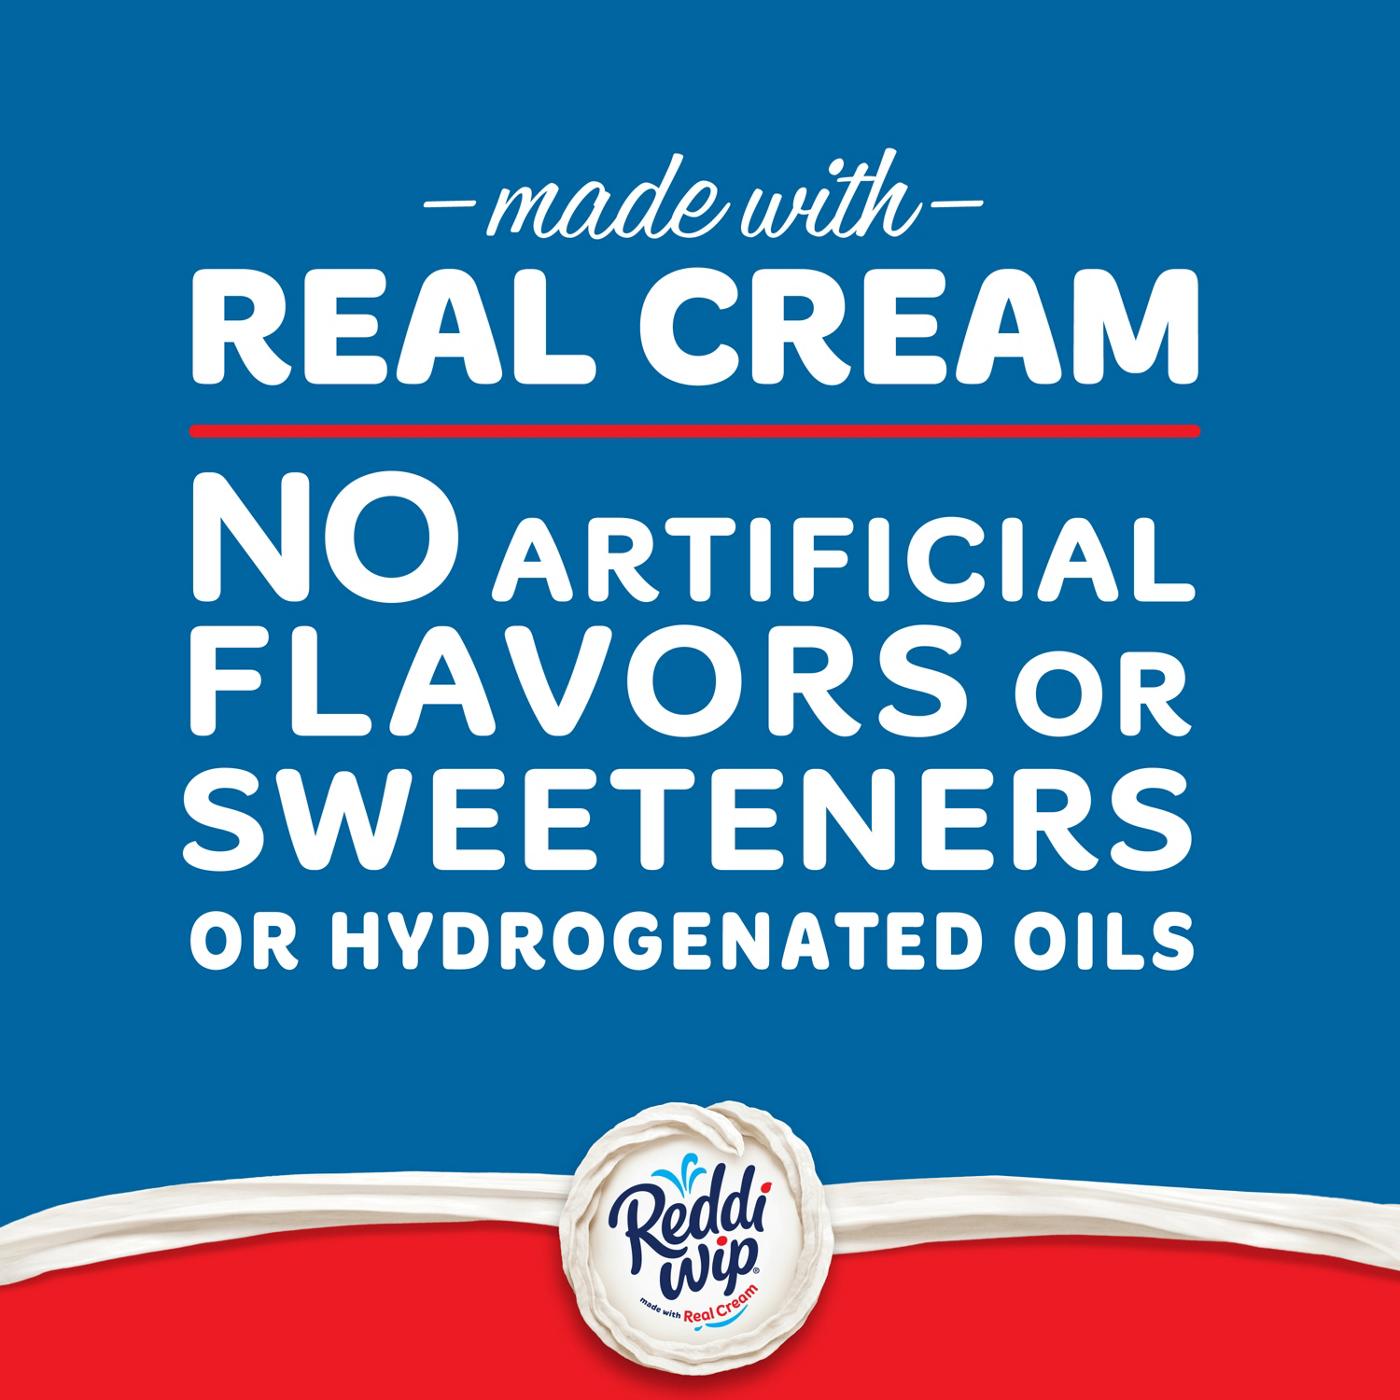 Reddi Wip Extra Creamy Whipped Topping Made with Real Cream; image 5 of 5